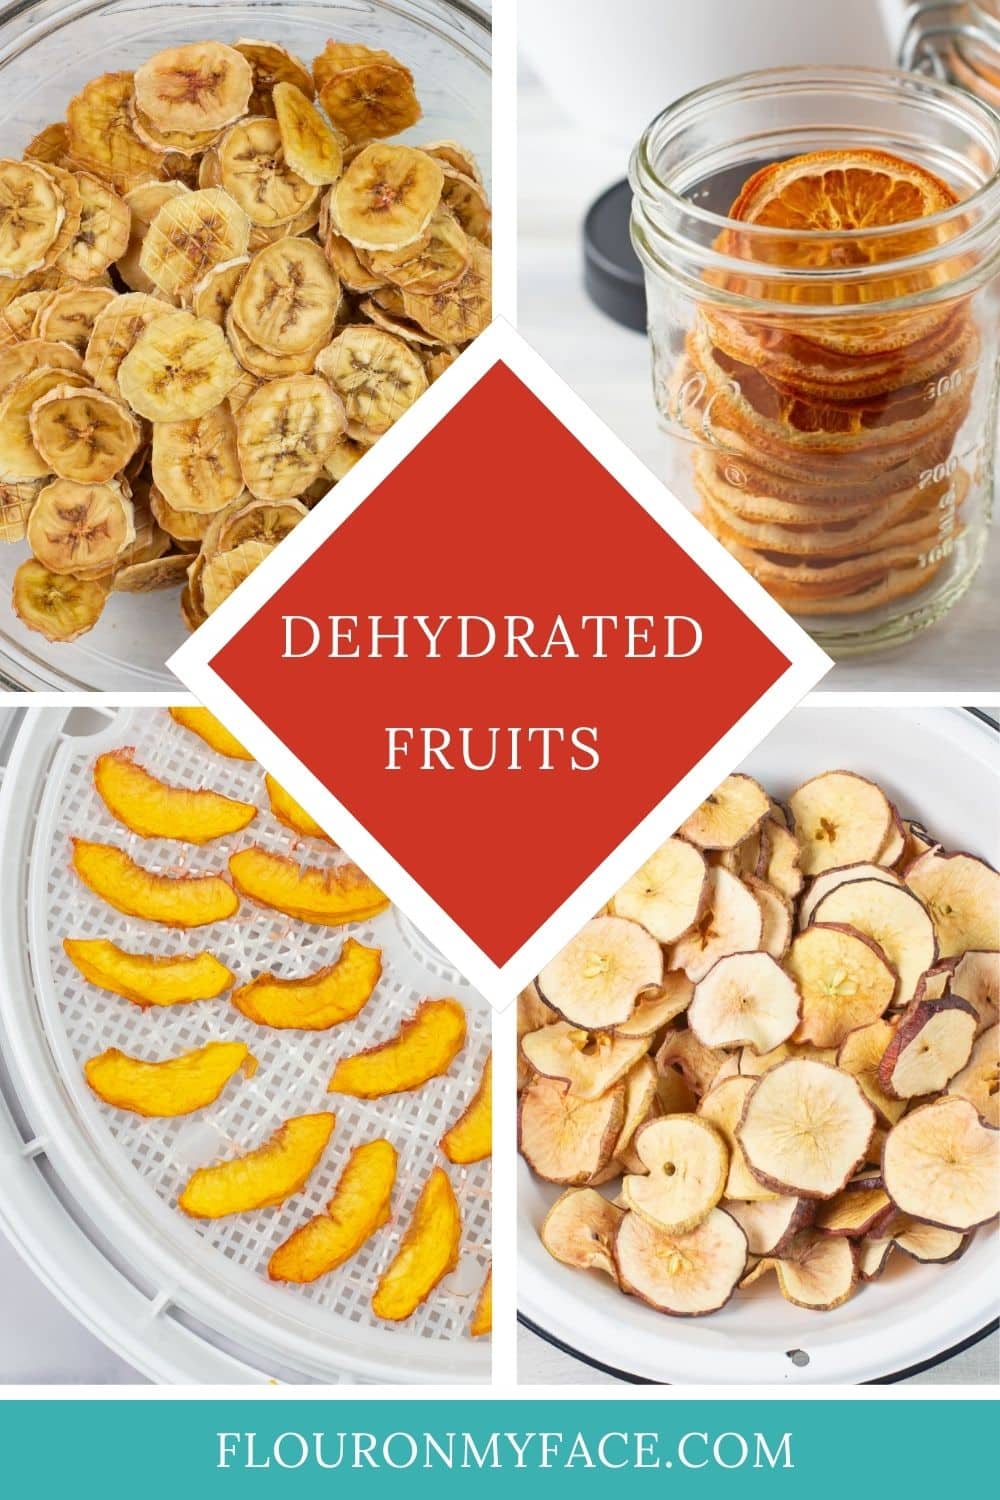 Large four image collage of dehydrated bananas, orange slices, peach slices, and sliced apples.